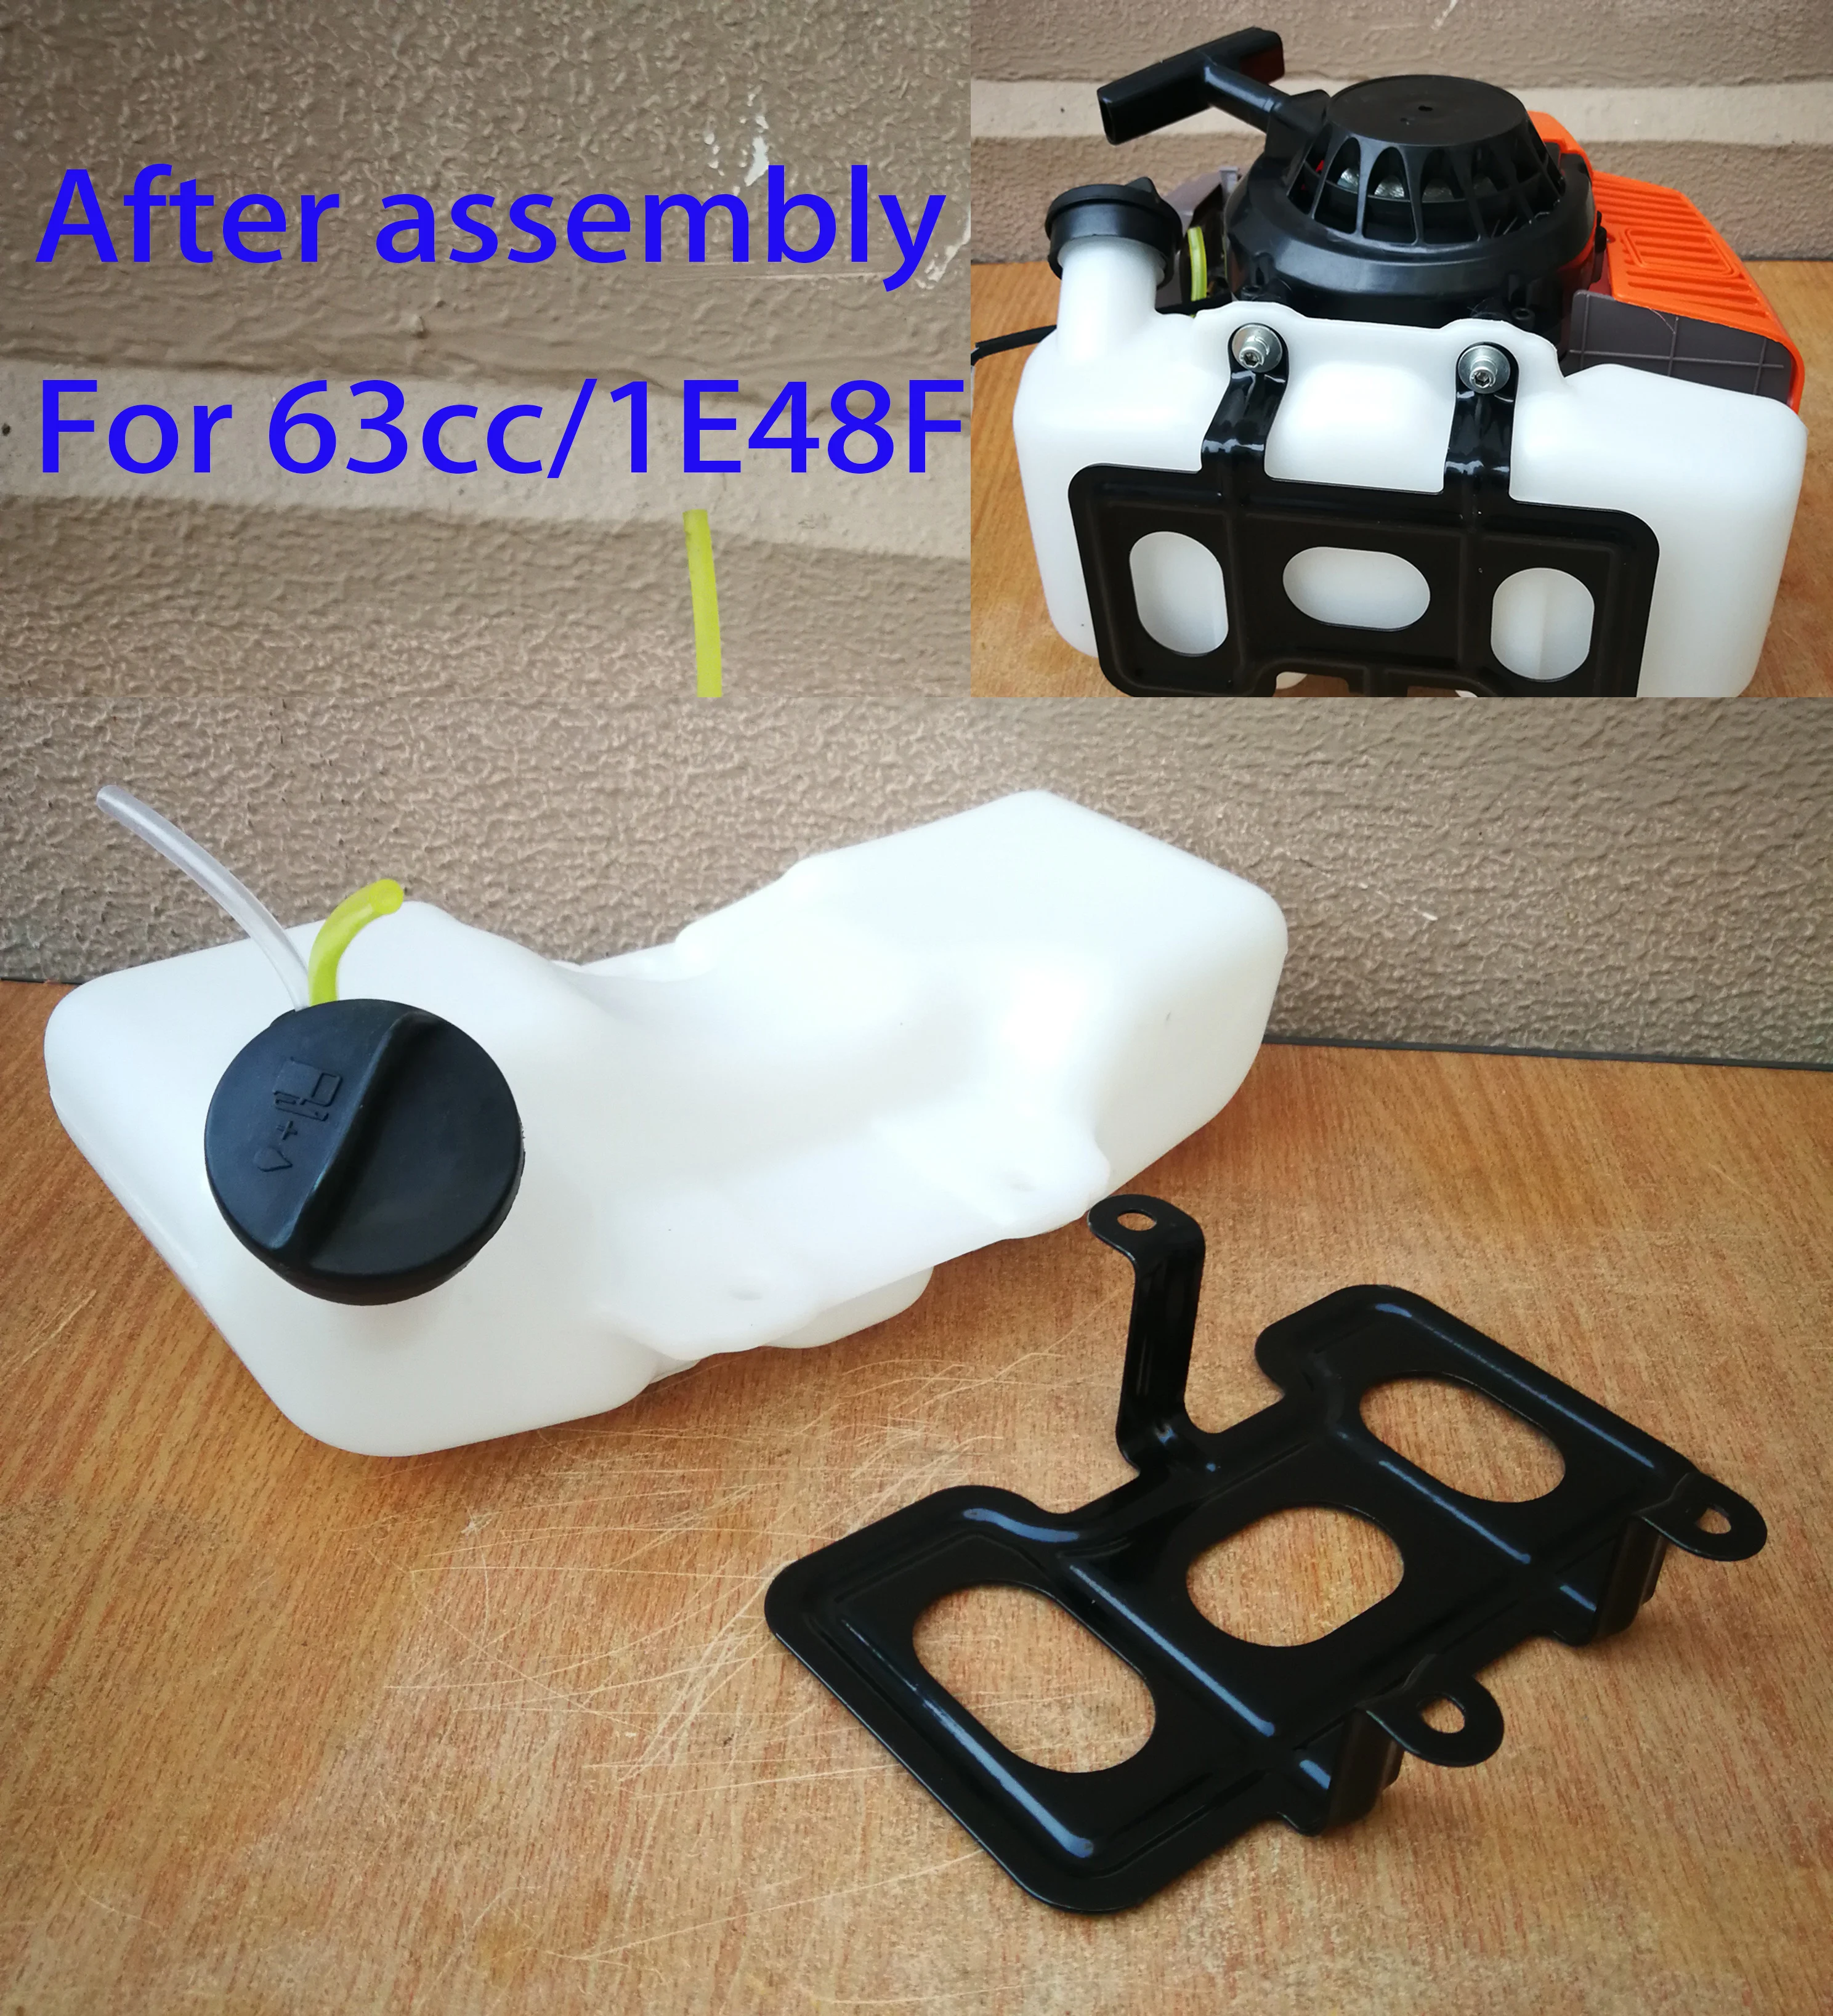 2T 63cc 1E48F Engine Metal Protector Support Seat Mount for Fuel Tank Mix Gasoline Case